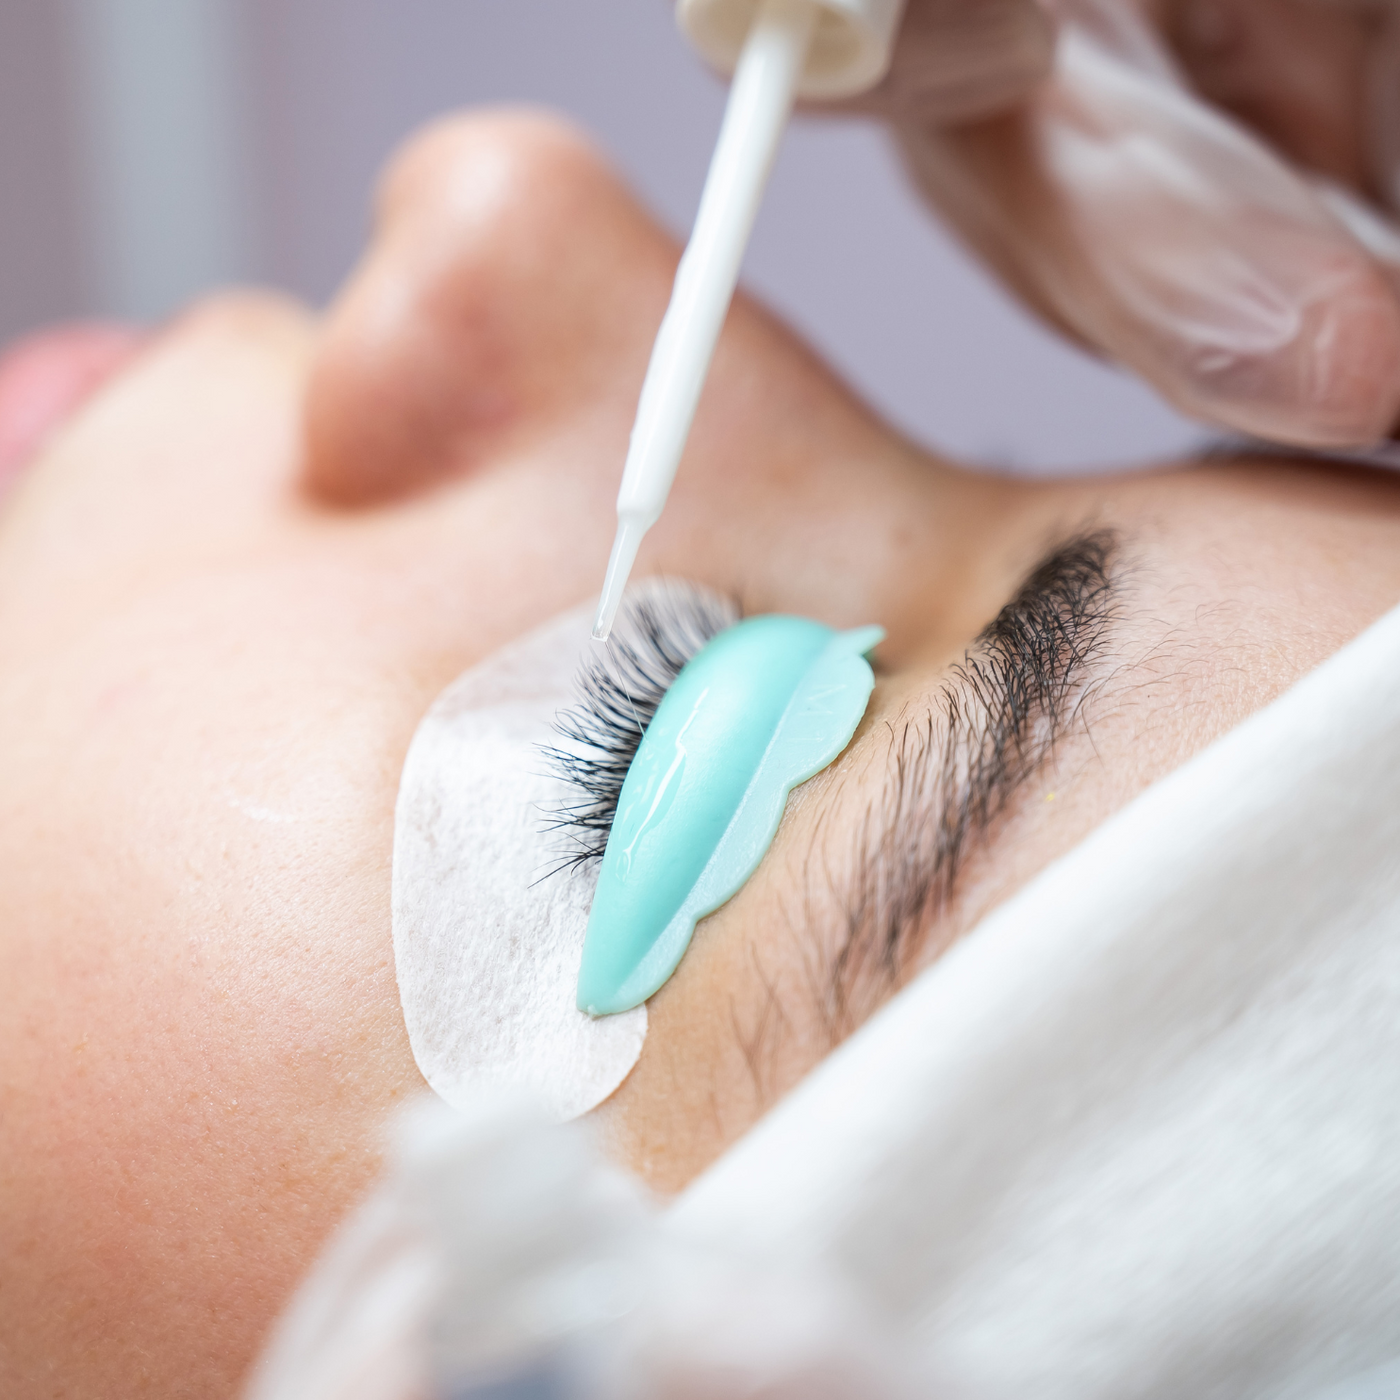 London Speed-Lift Lash Lifting and Tinting Online Course